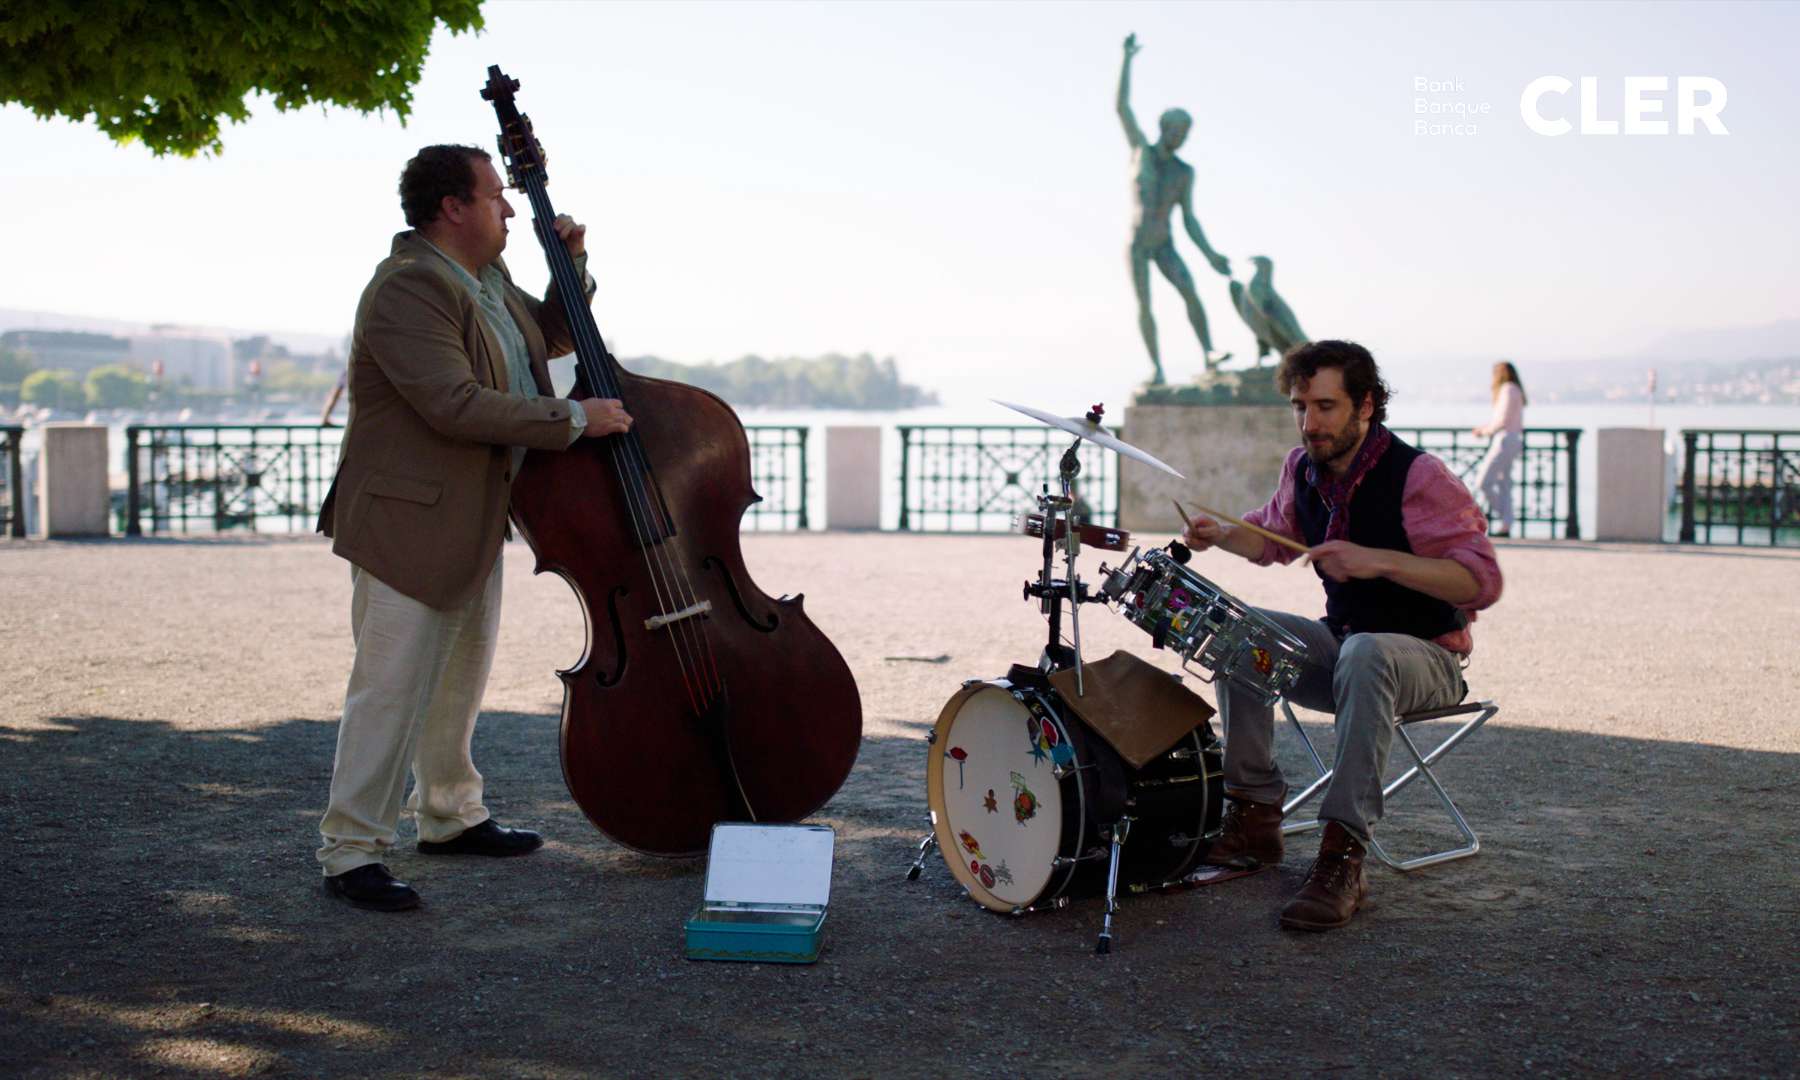 Two musicians playing the double bass and the drums on the famous Bürkliplatz in Zurich.